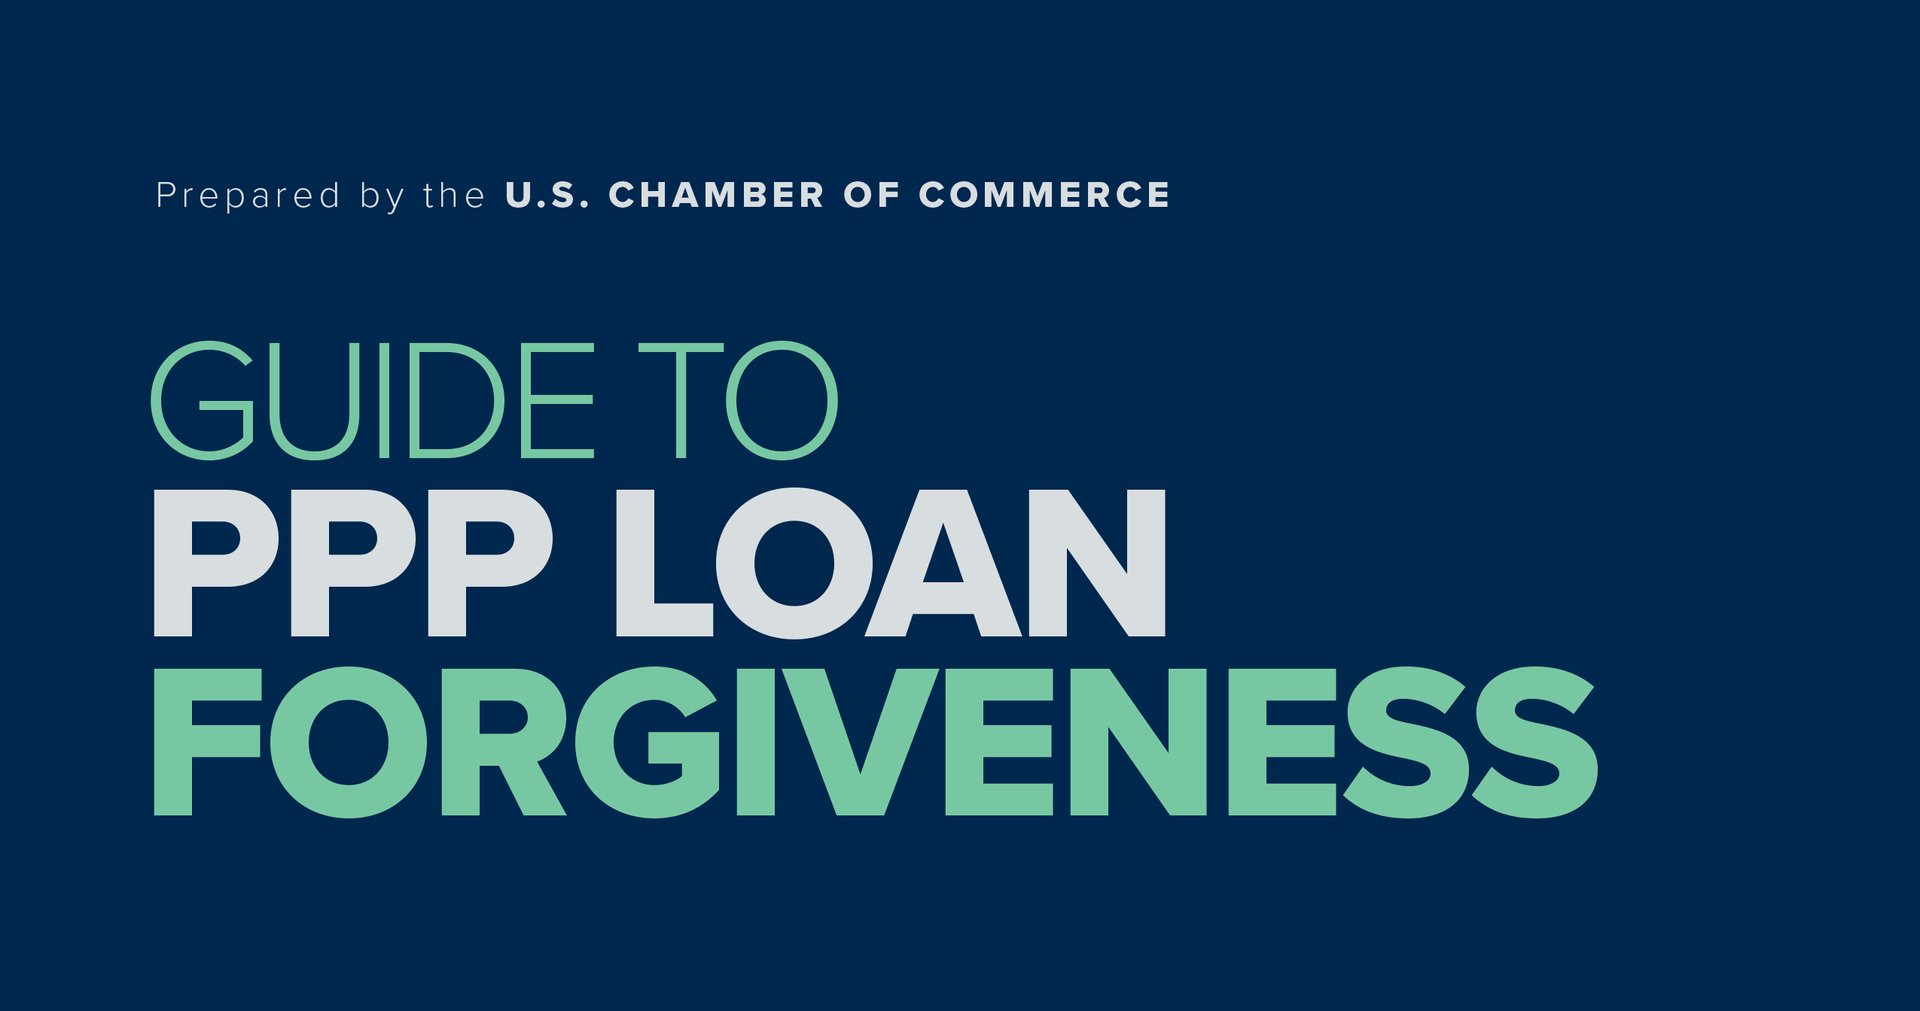 USCOC Guide to PPP Loan Forgiveness